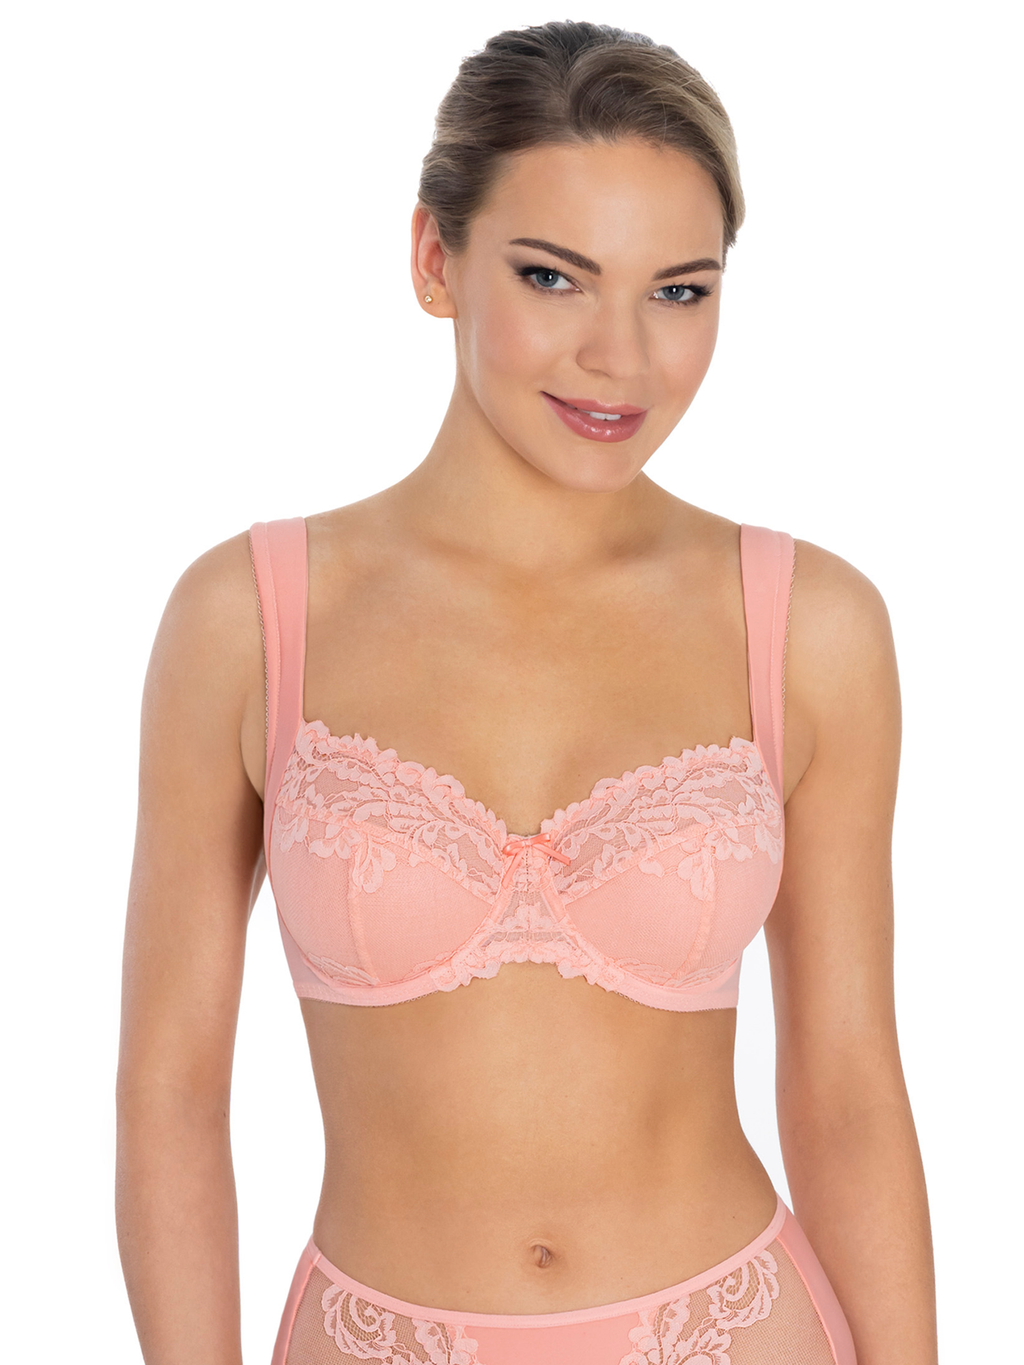 Lauma, Peach Pink Underwired Non-padded Bra, On Model Front, 58K23